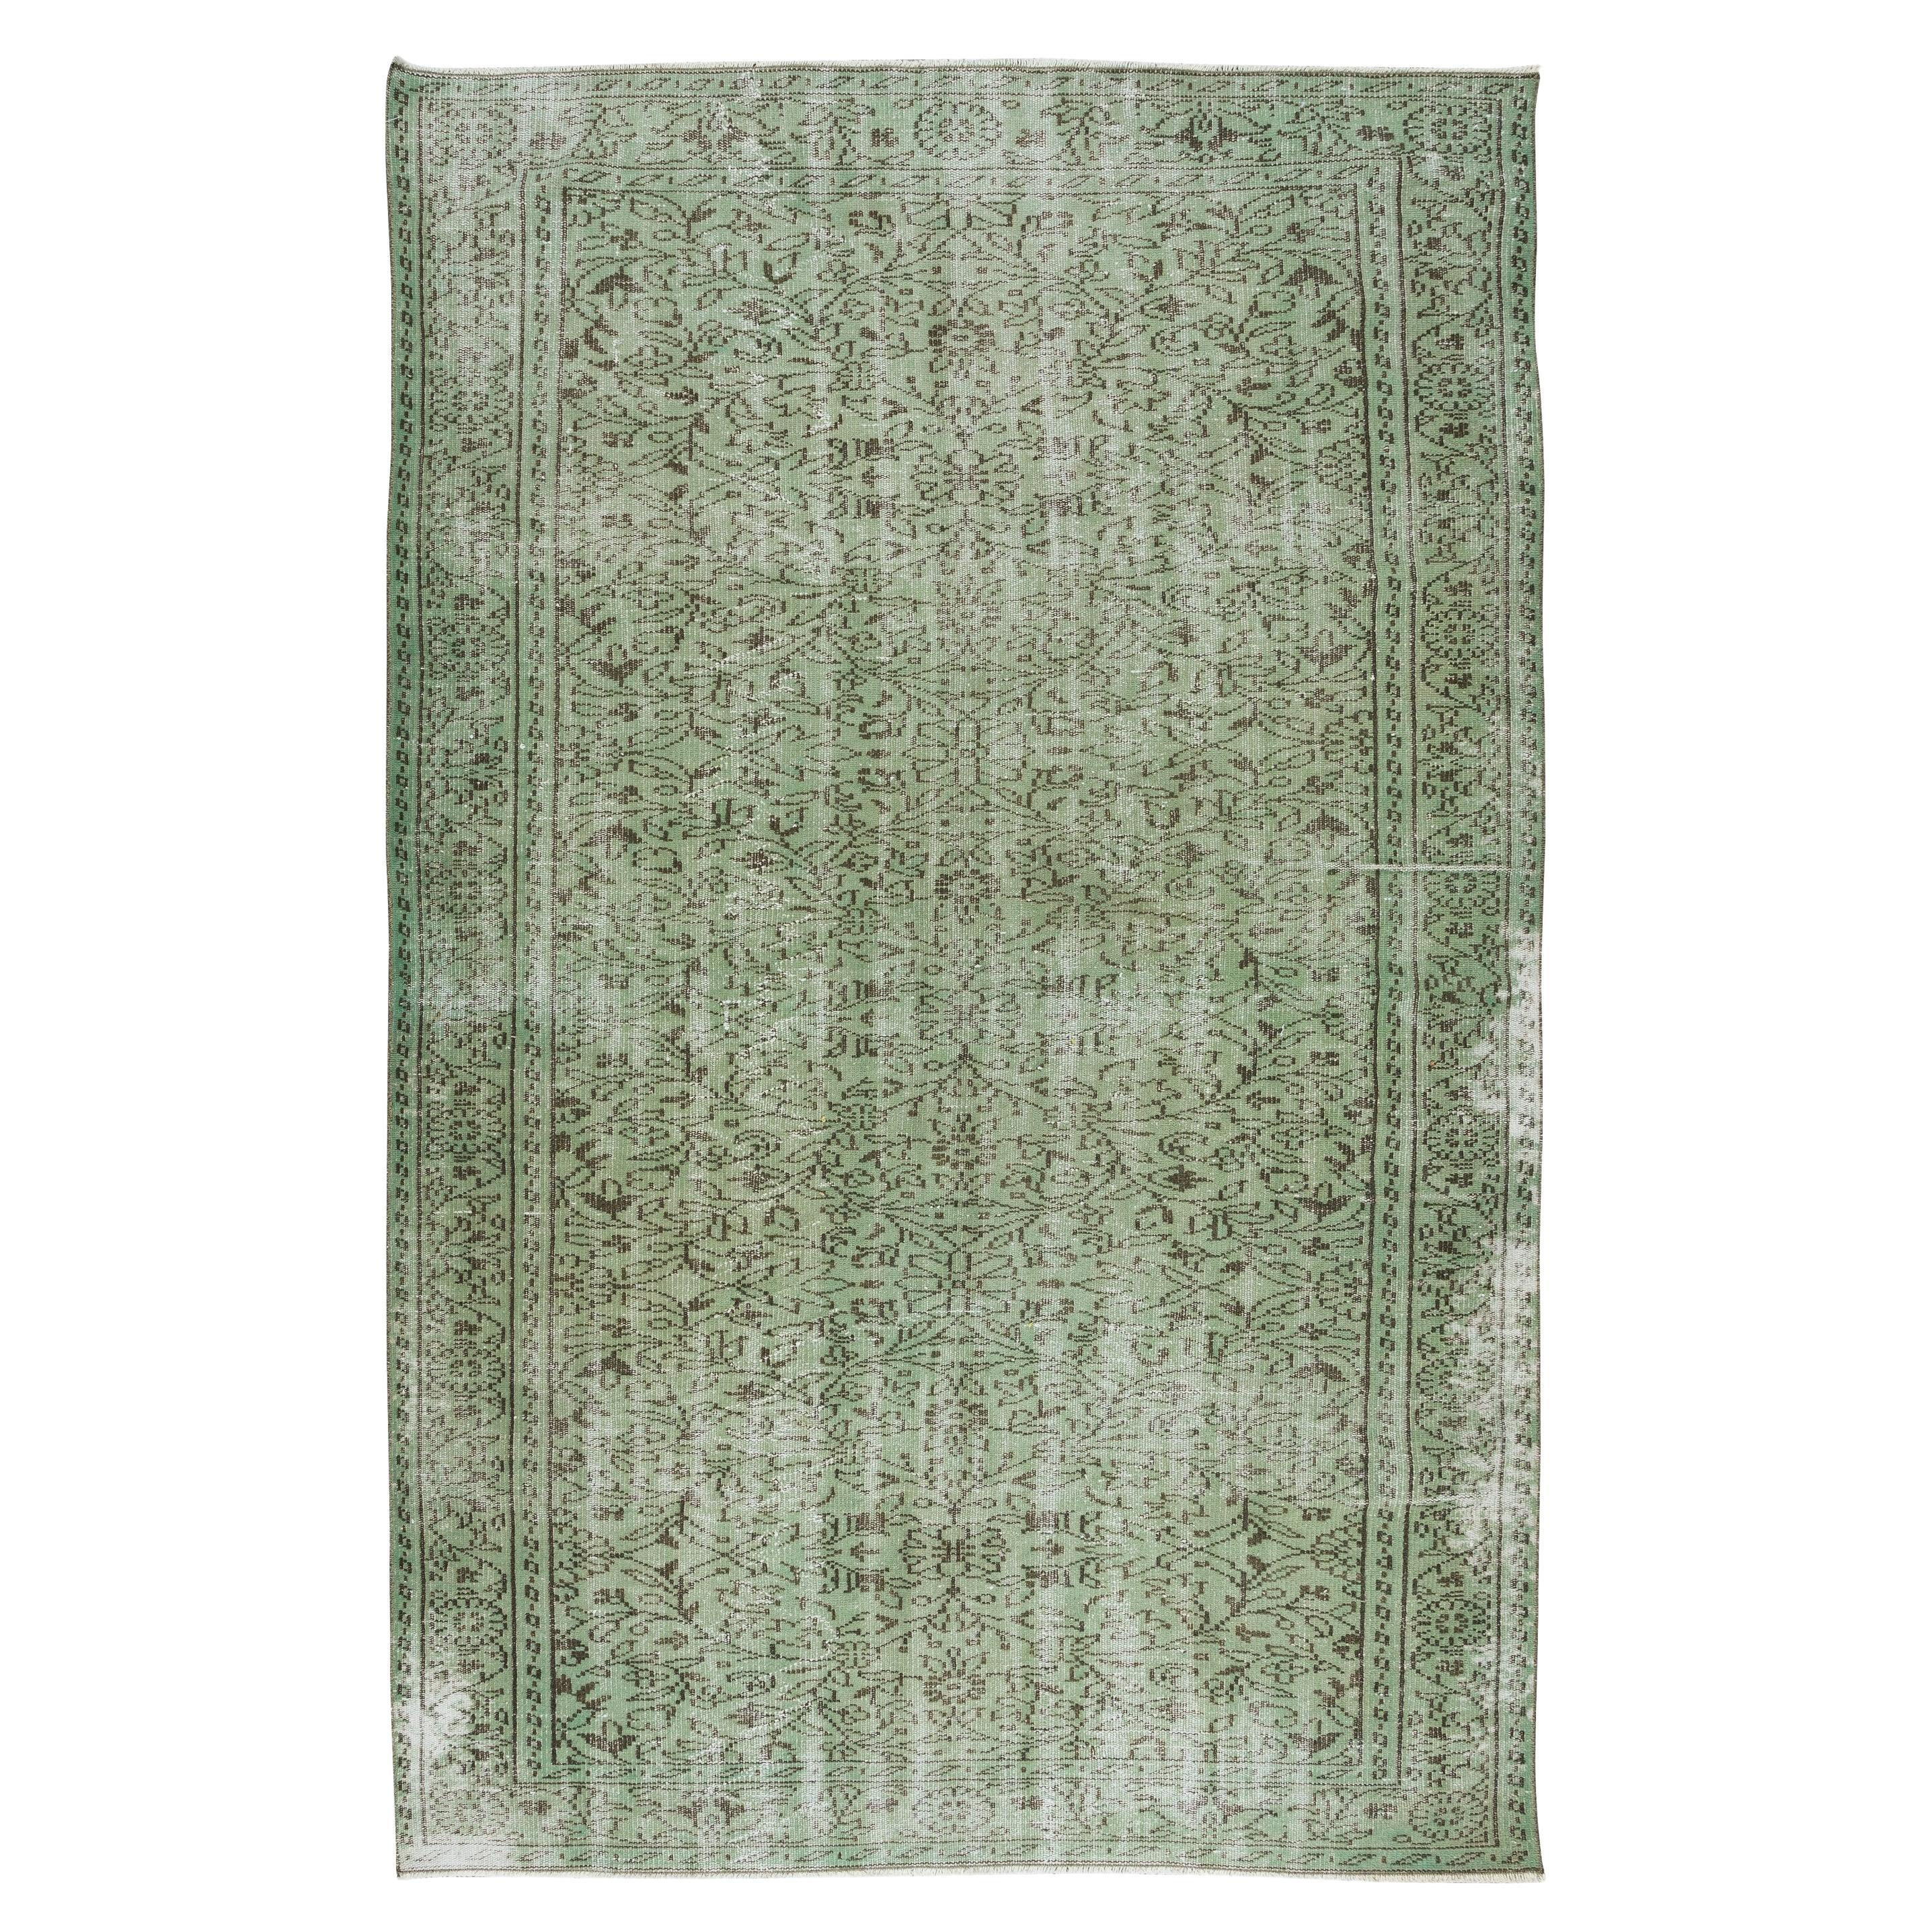 6x9.4 Ft Green Distressed Turkish Area Rug, Hand Knotted Vintage Wool Carpet